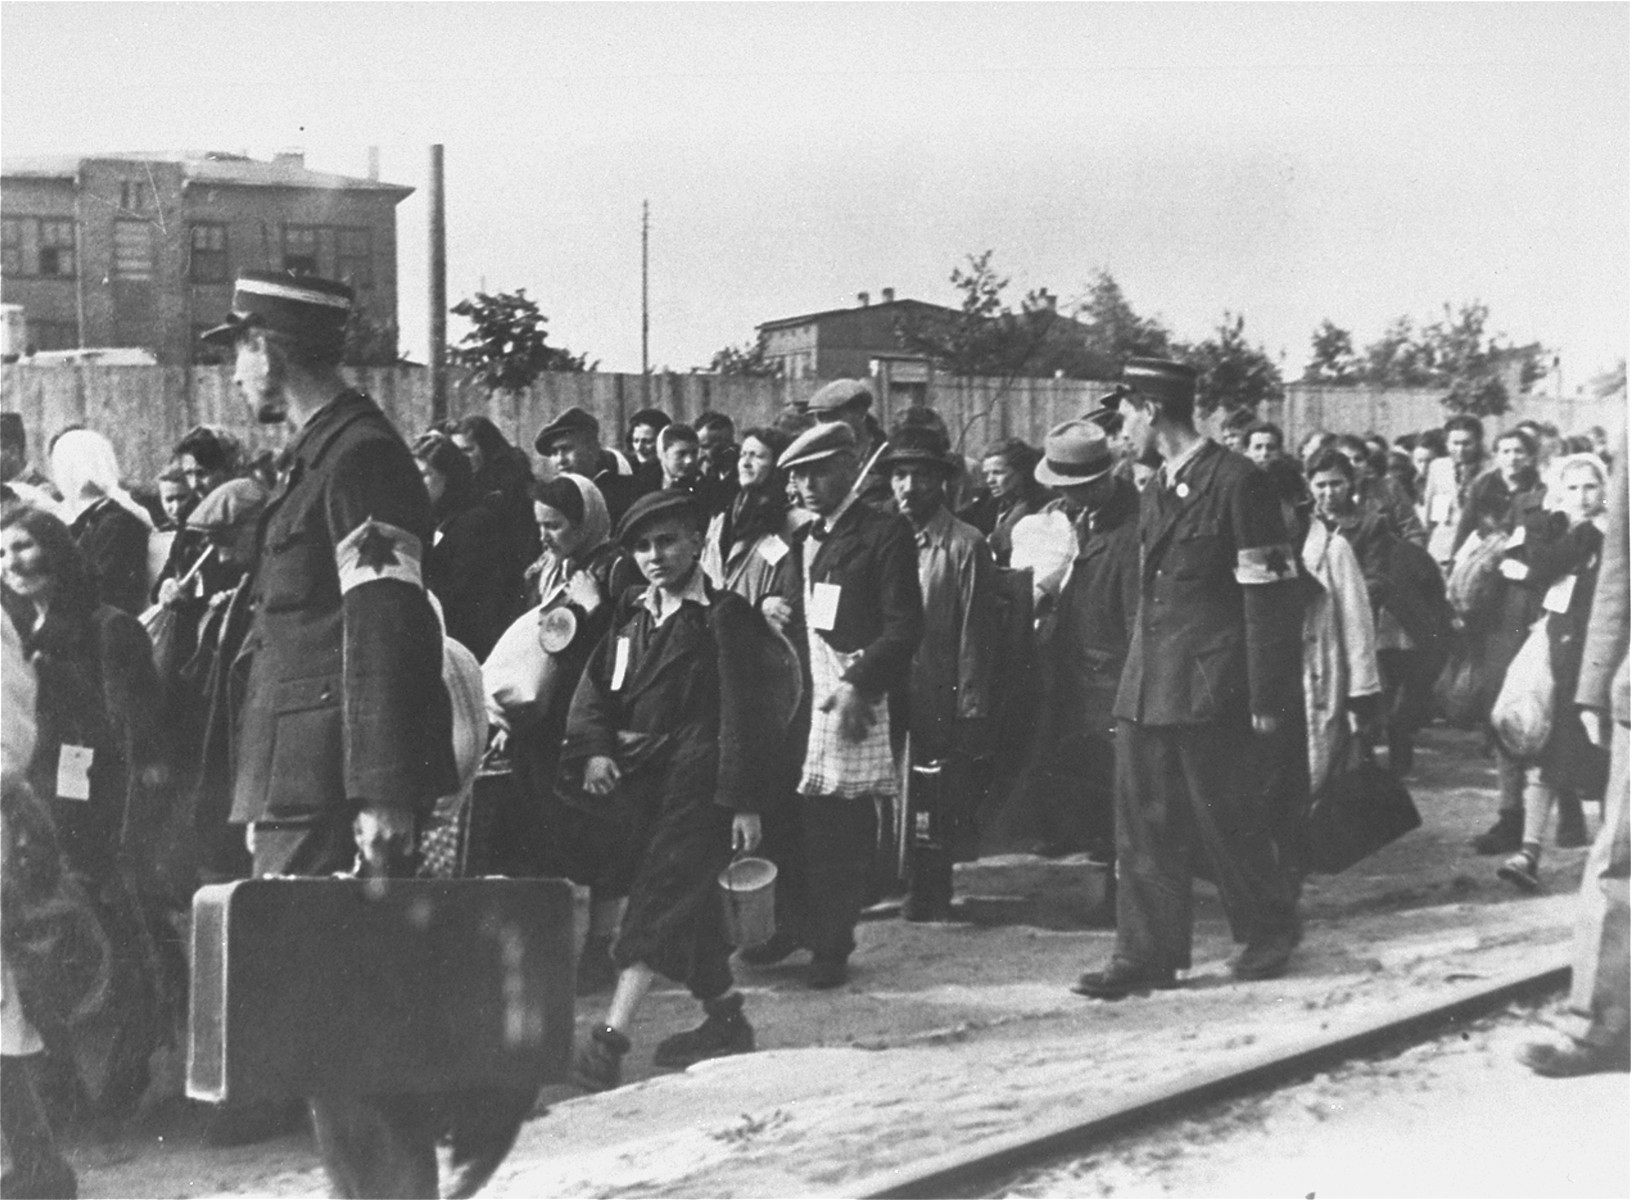 Jewish police escort a group of Jews who have been rounded-up for deportation in the Lodz ghetto.